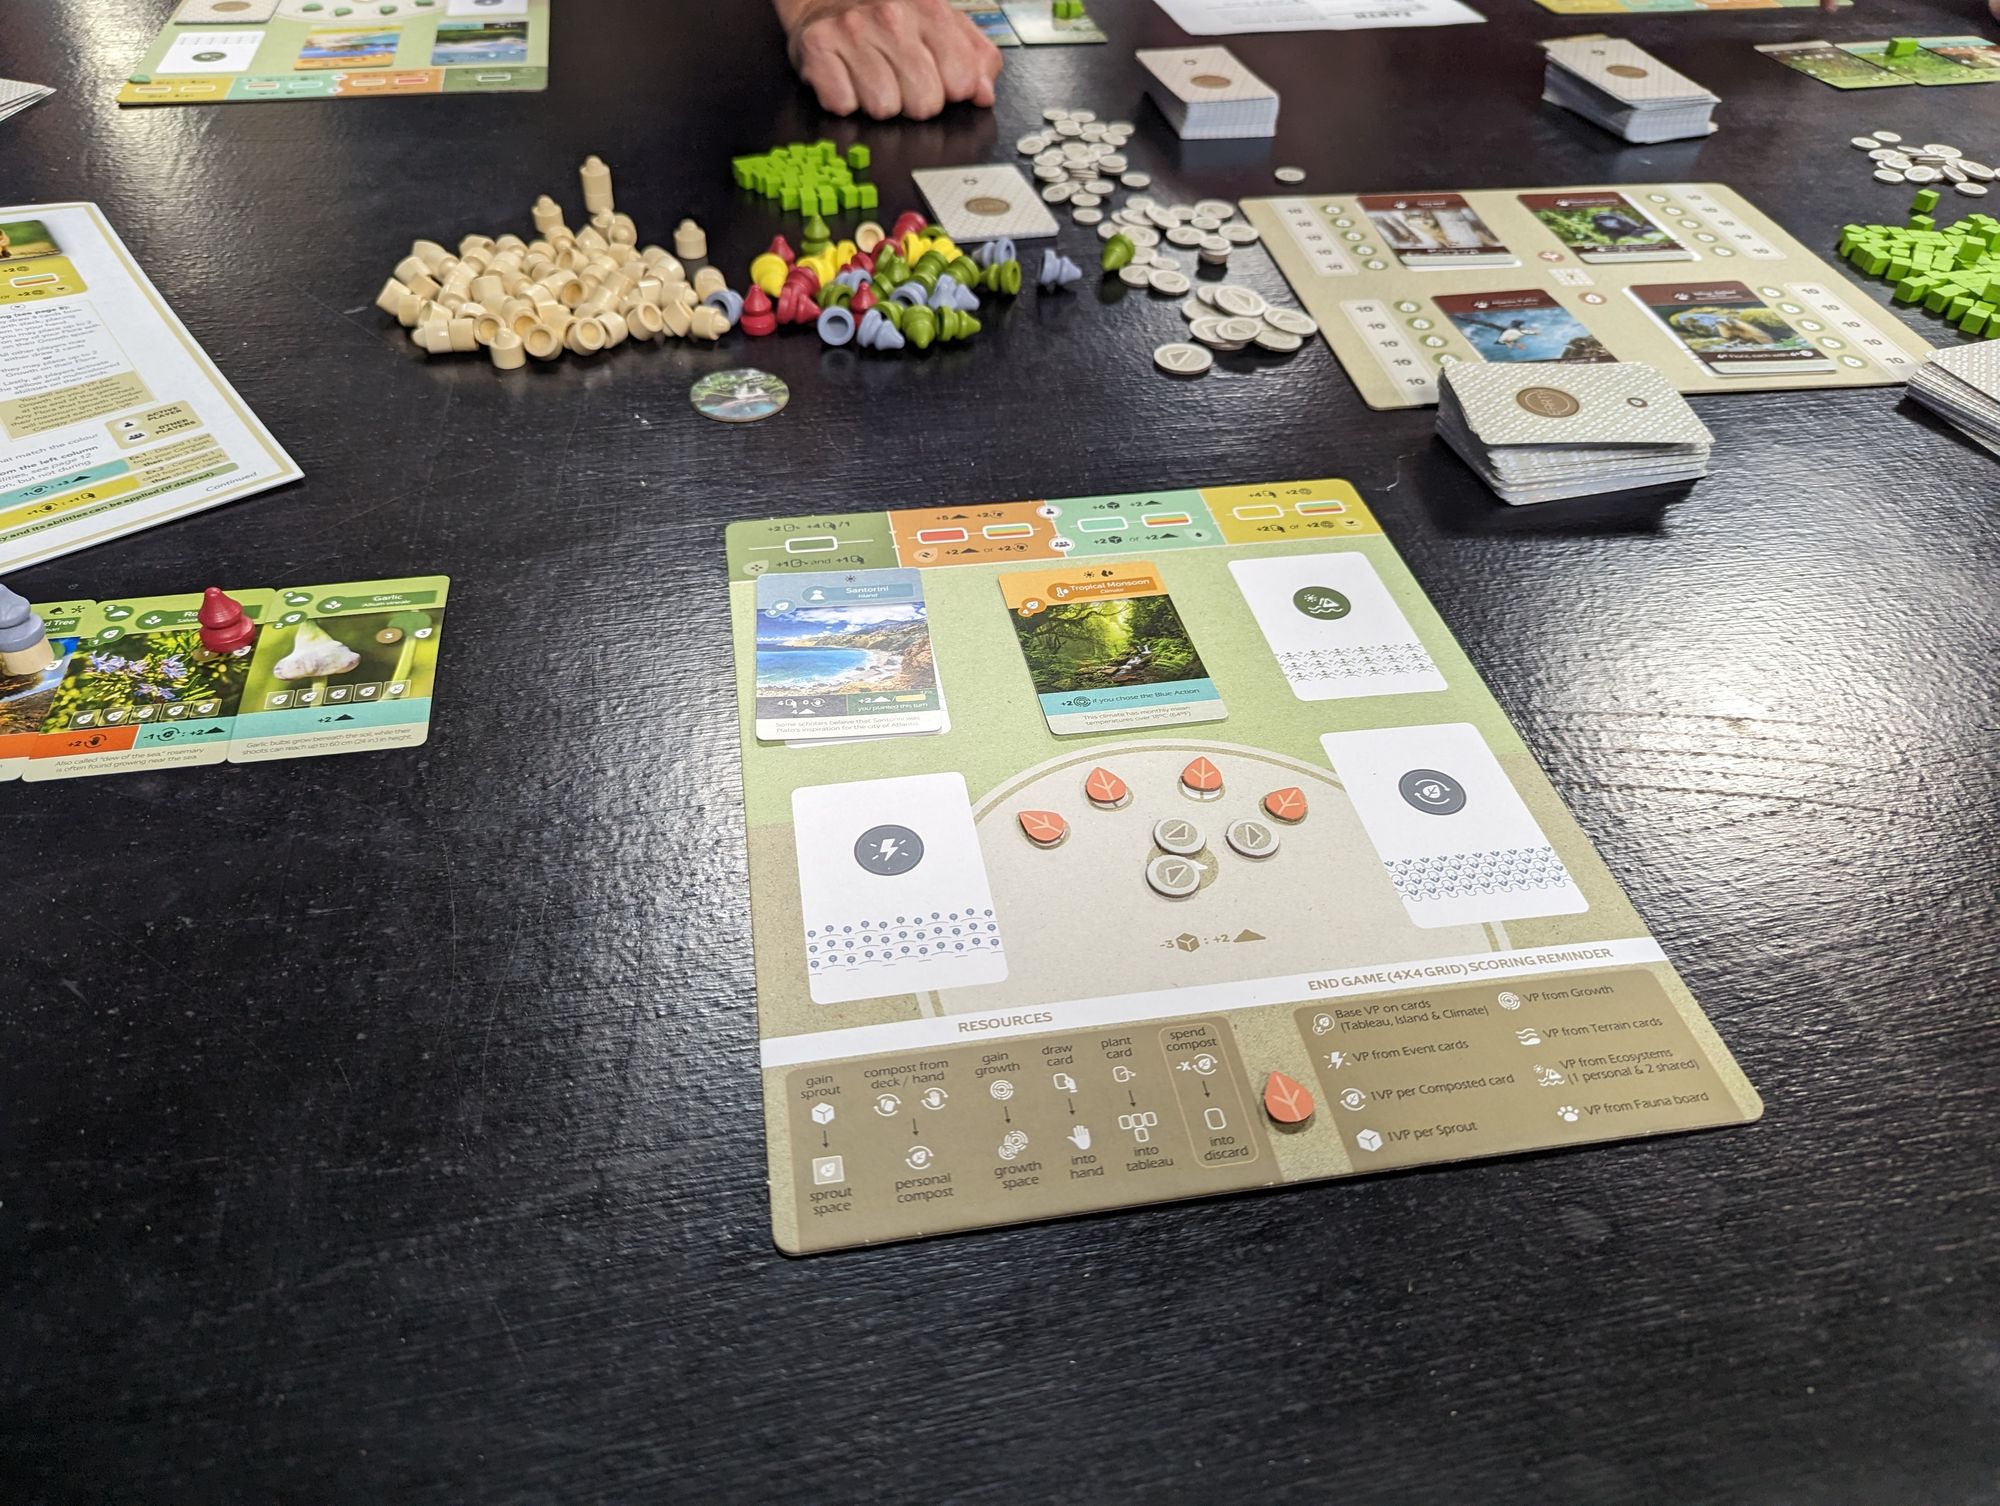 Exploring New Frontiers: My Journey with Earth at the Board Game Meetup